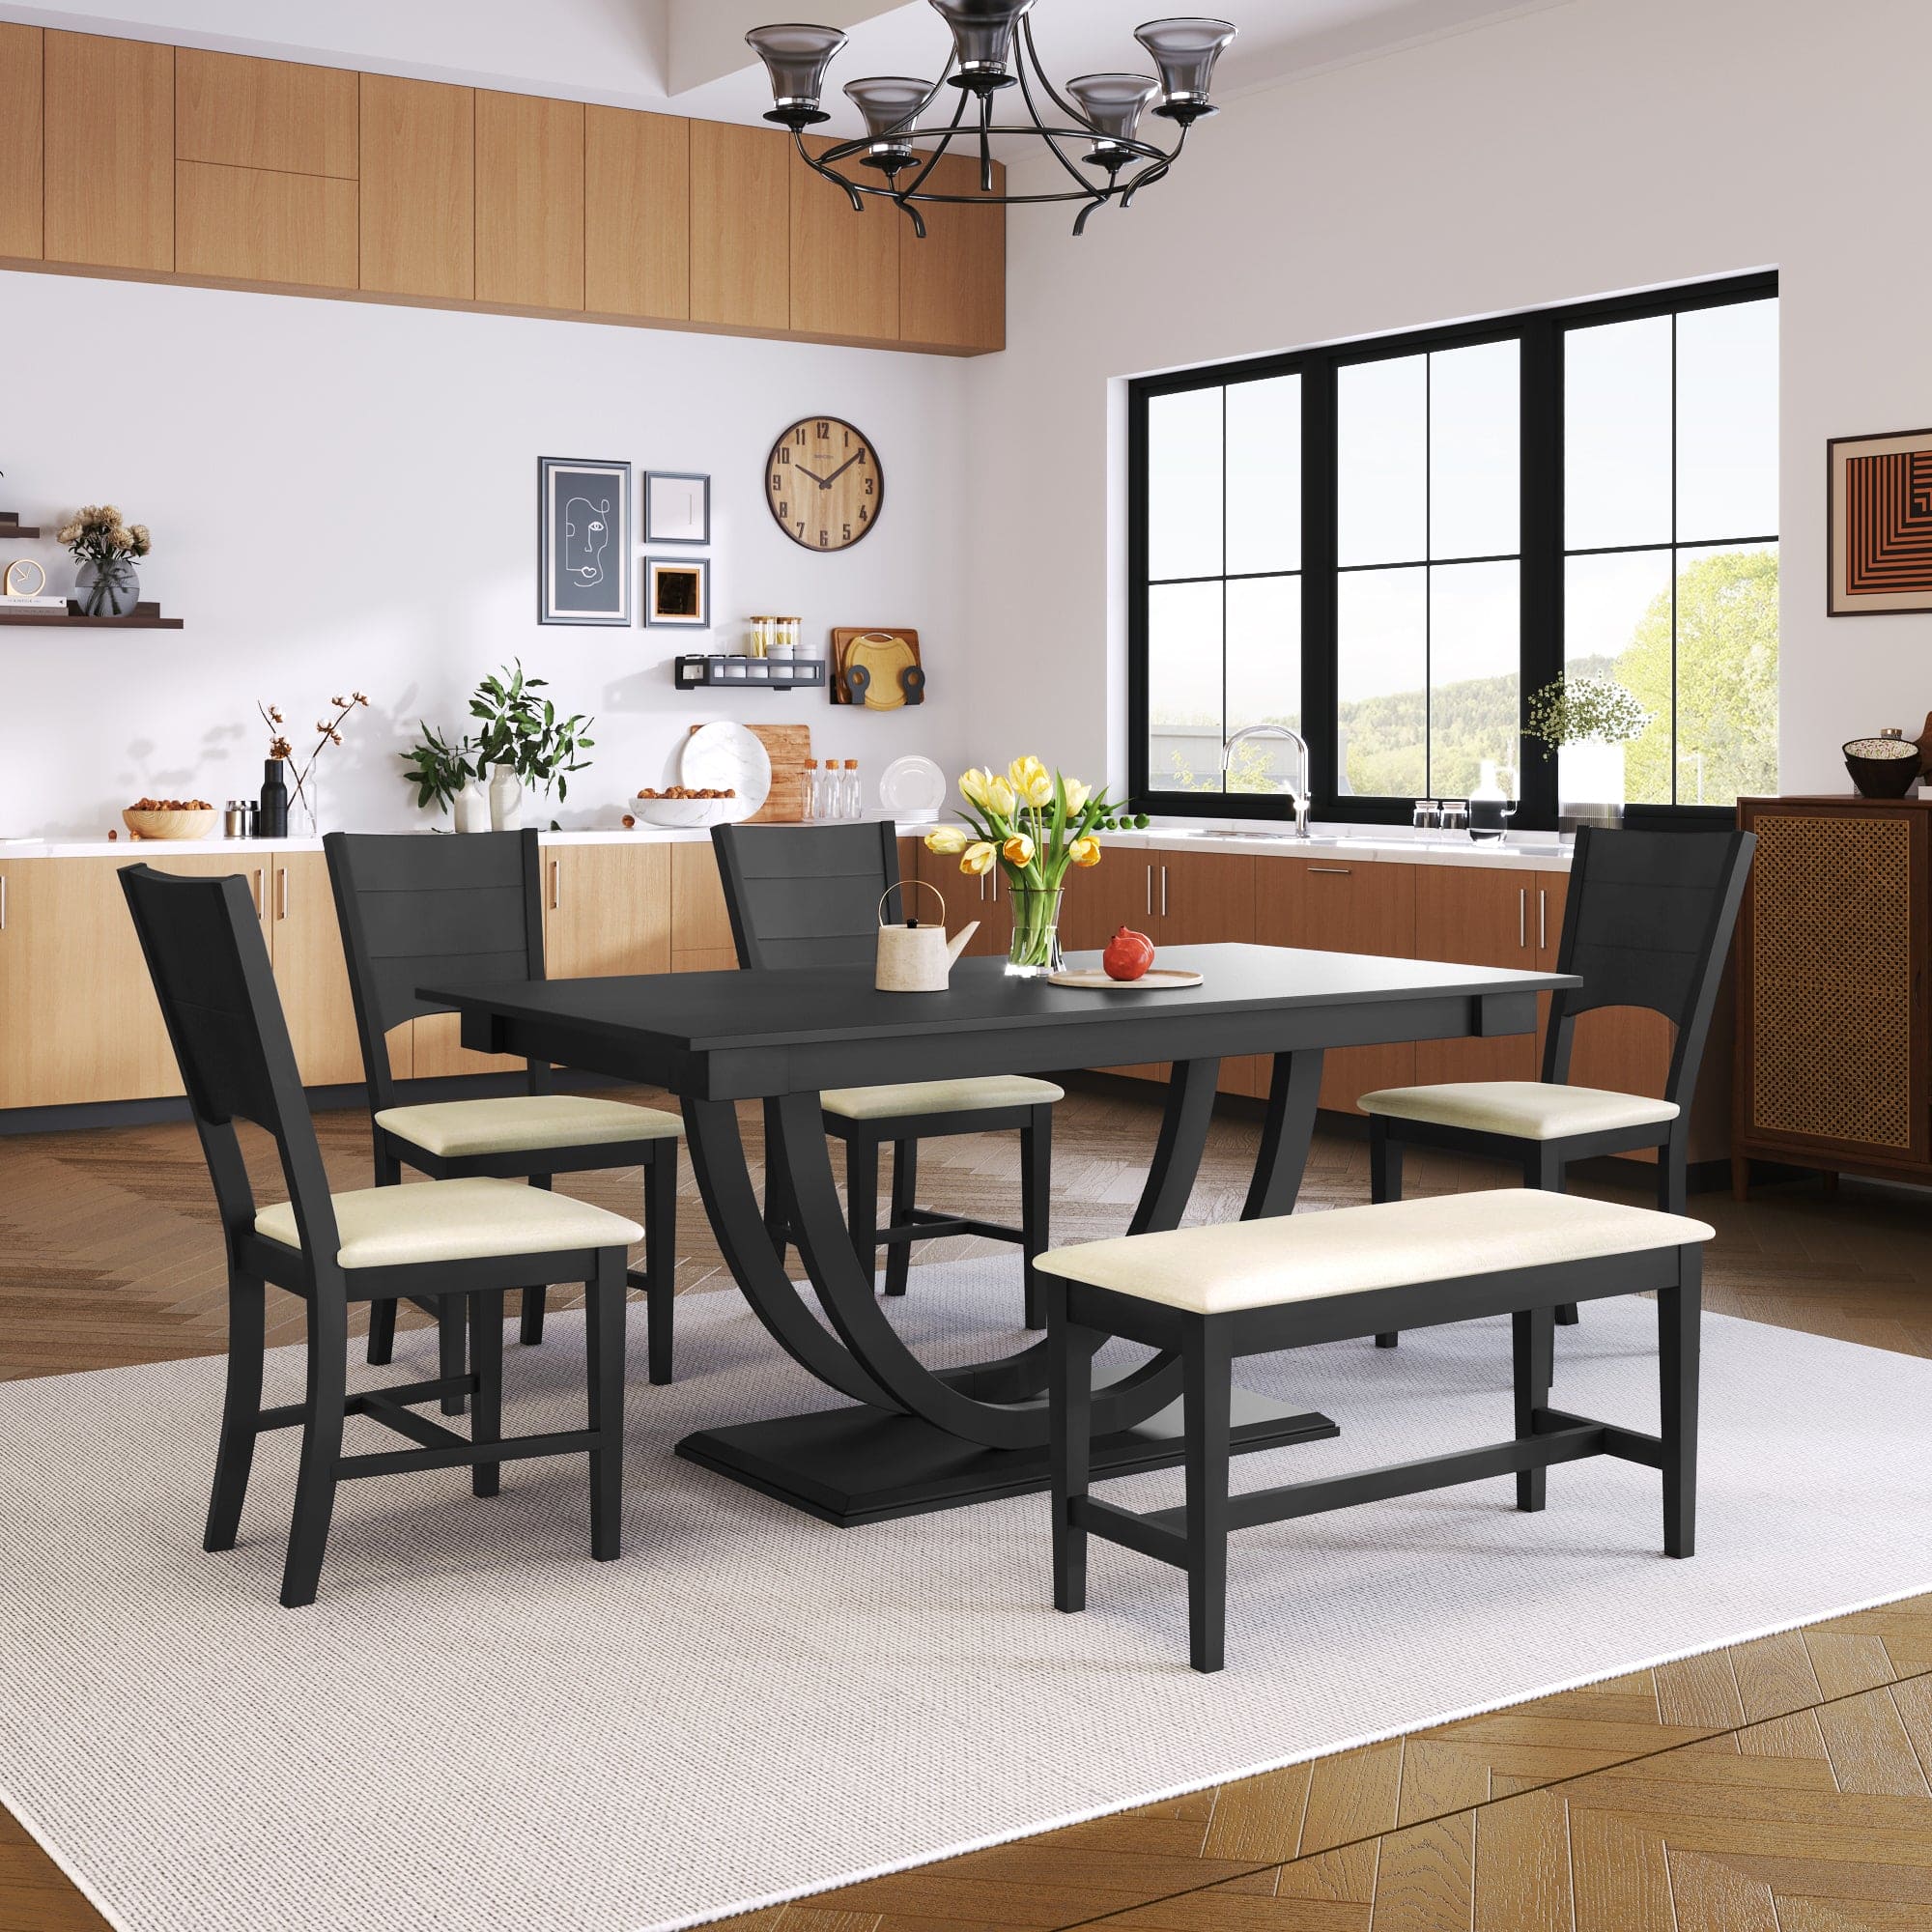 TOPMAX 6-Piece Wood Half Round Dining Table Set Kitchen Table Set with Long Bench and 4 Dining Chairs, Modern Style, Gray